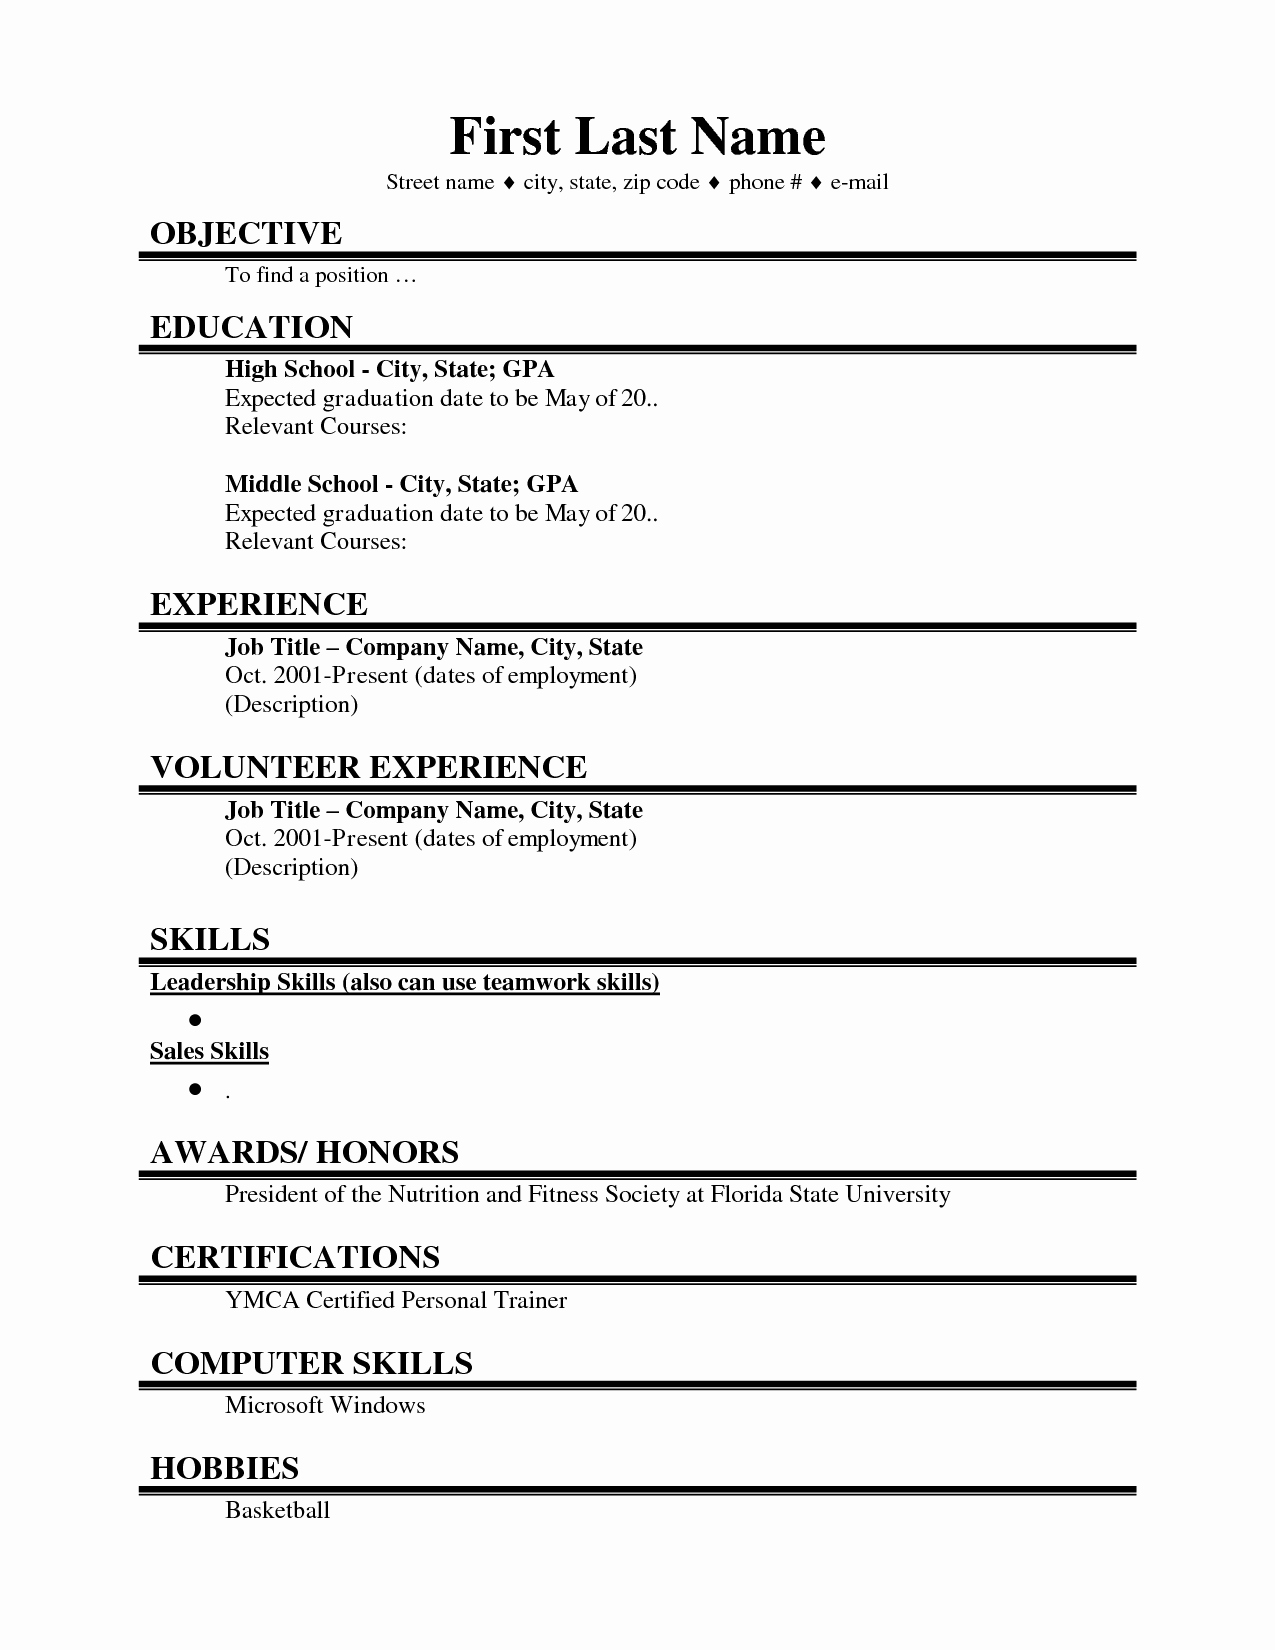 Free Resume Templates for Students Beautiful First Job Resume Google Search Resume